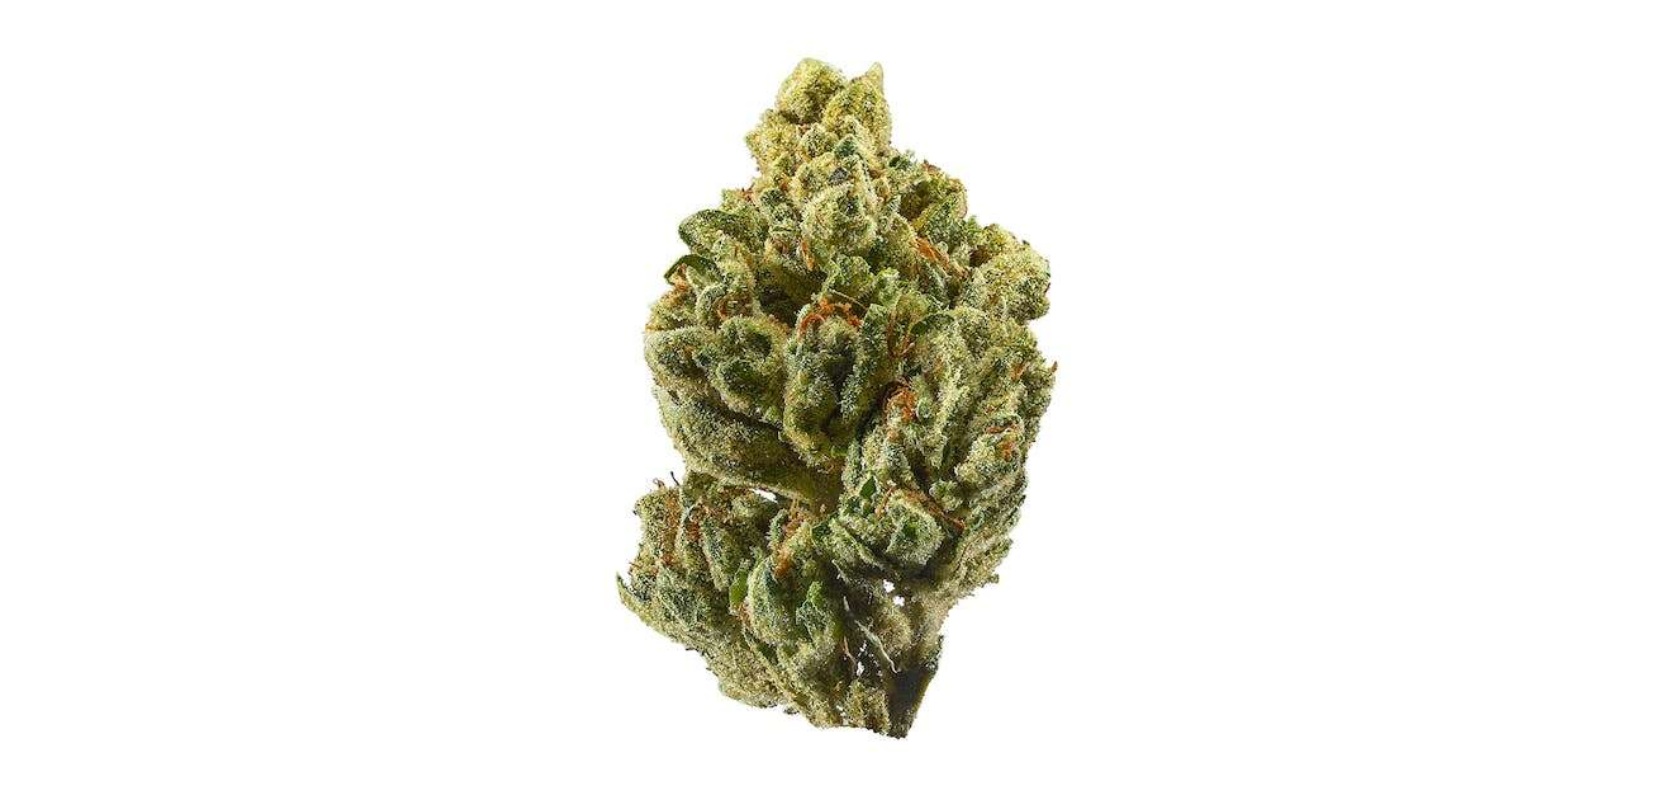 The internet is full of ambiguous articles. One review claims that OG Kush is a slightly Sativa-leaning hybrid, while others say it is Indica. 